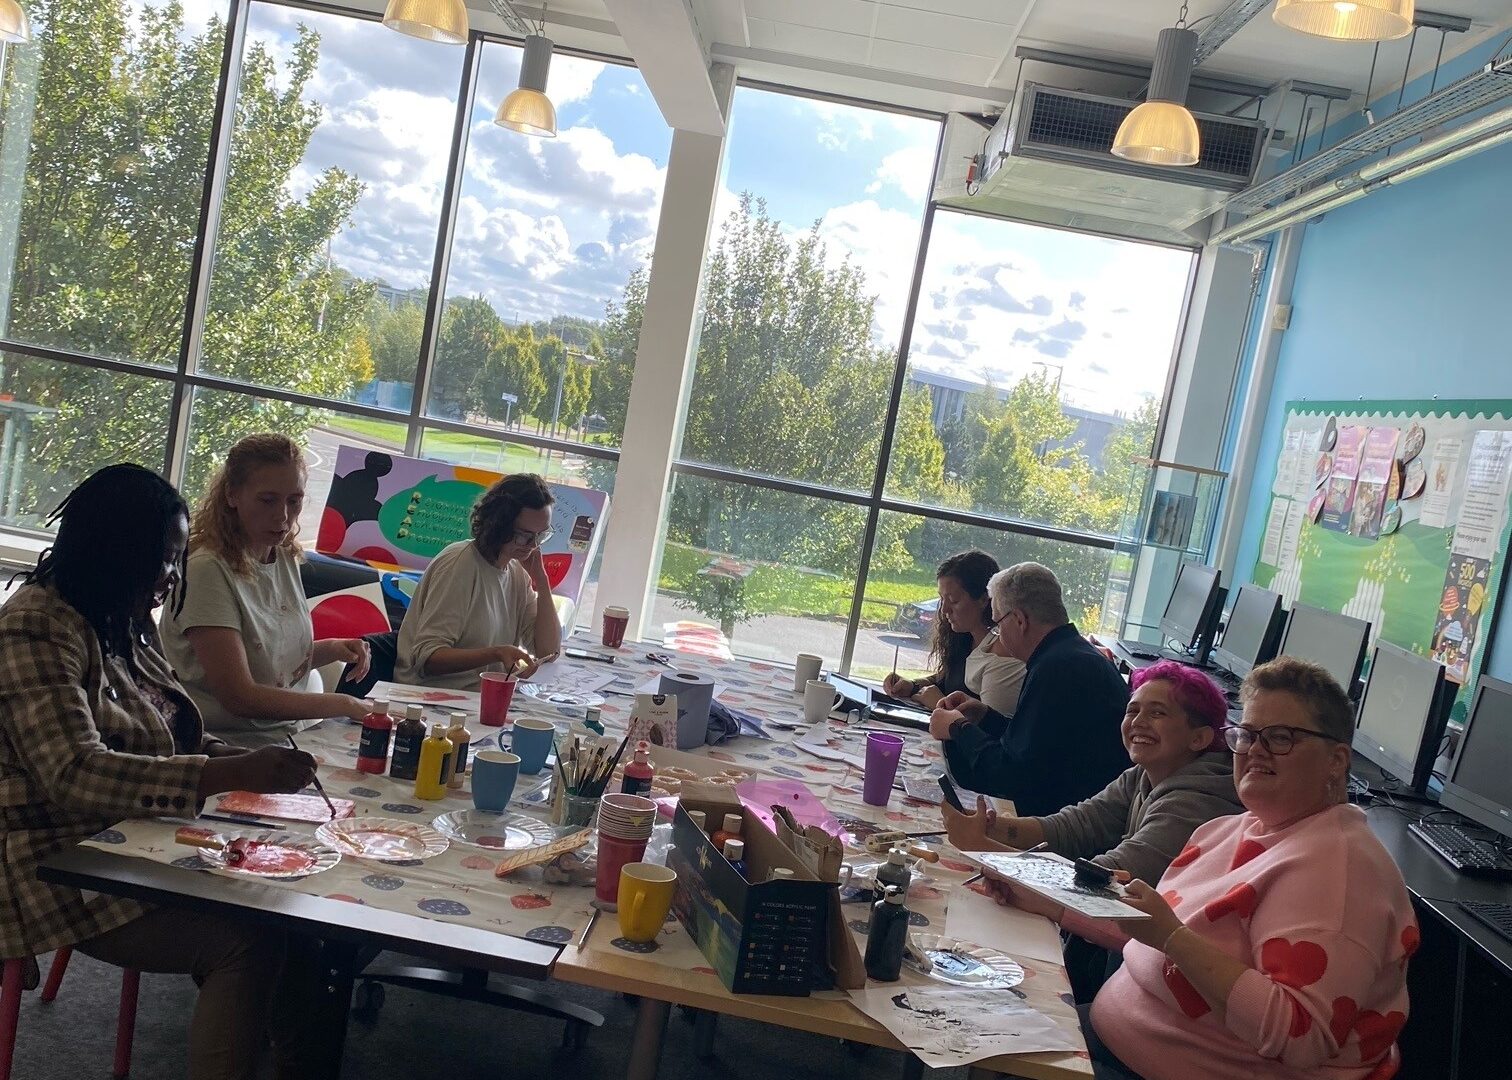 A group of 7 sit around a large table full of craft materials, including paint, large window overlooking trees behind them.